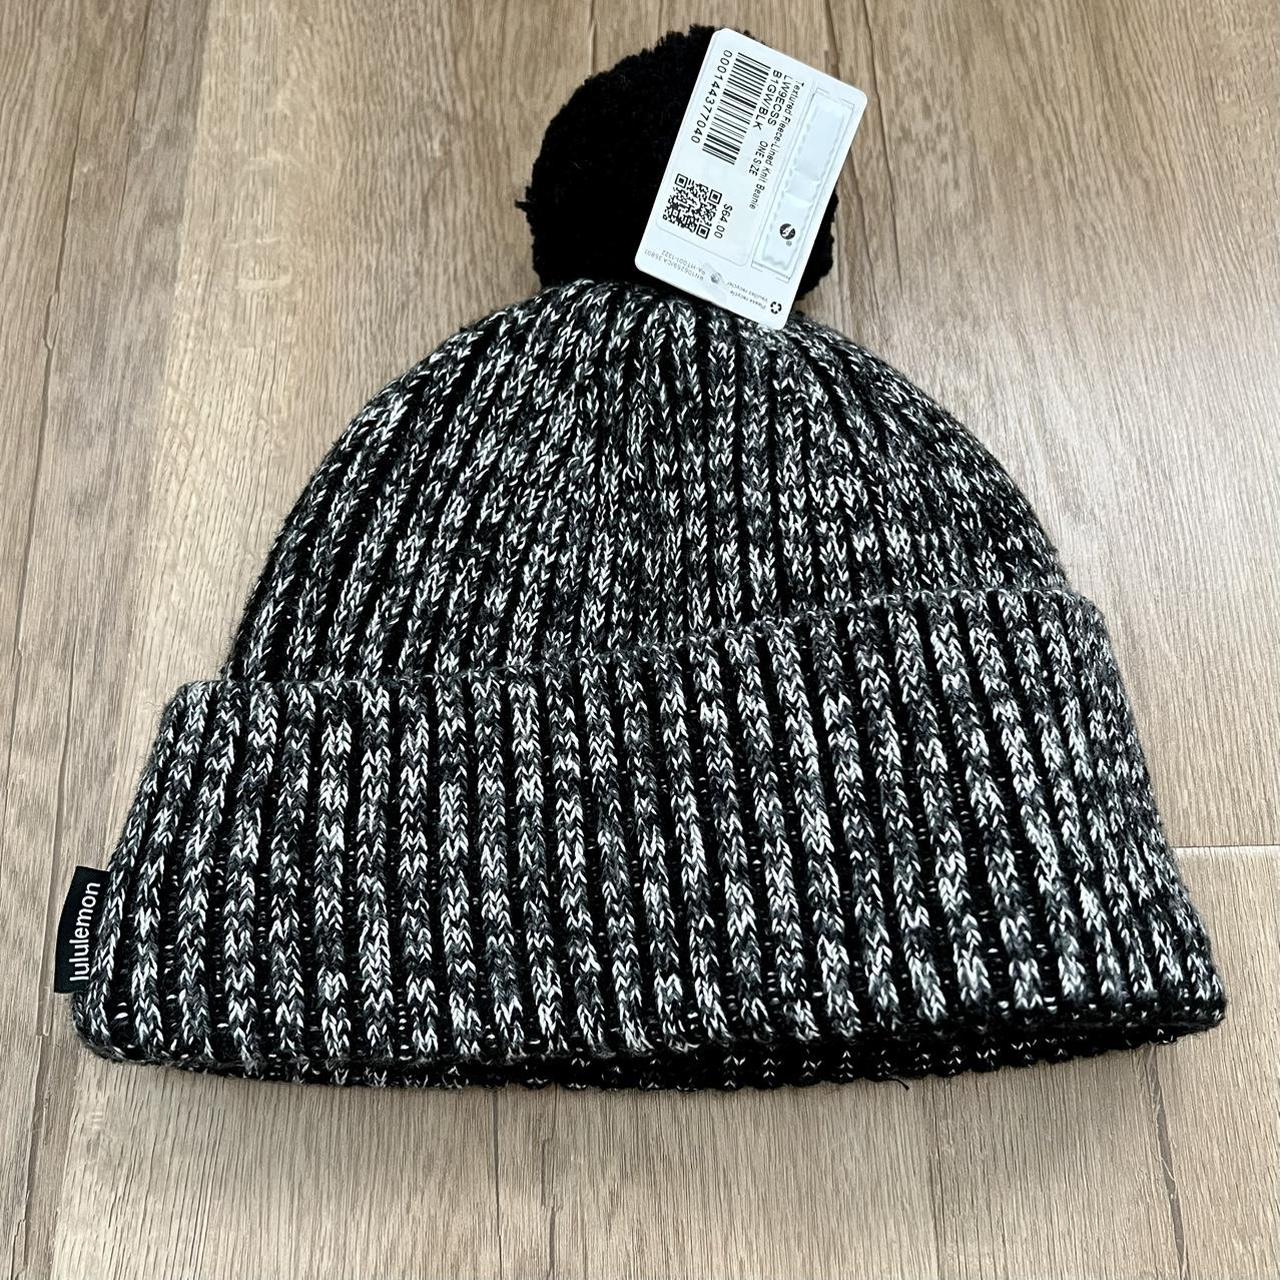 Buy Black Textured Fleece Lined Beanie Hat from Next USA